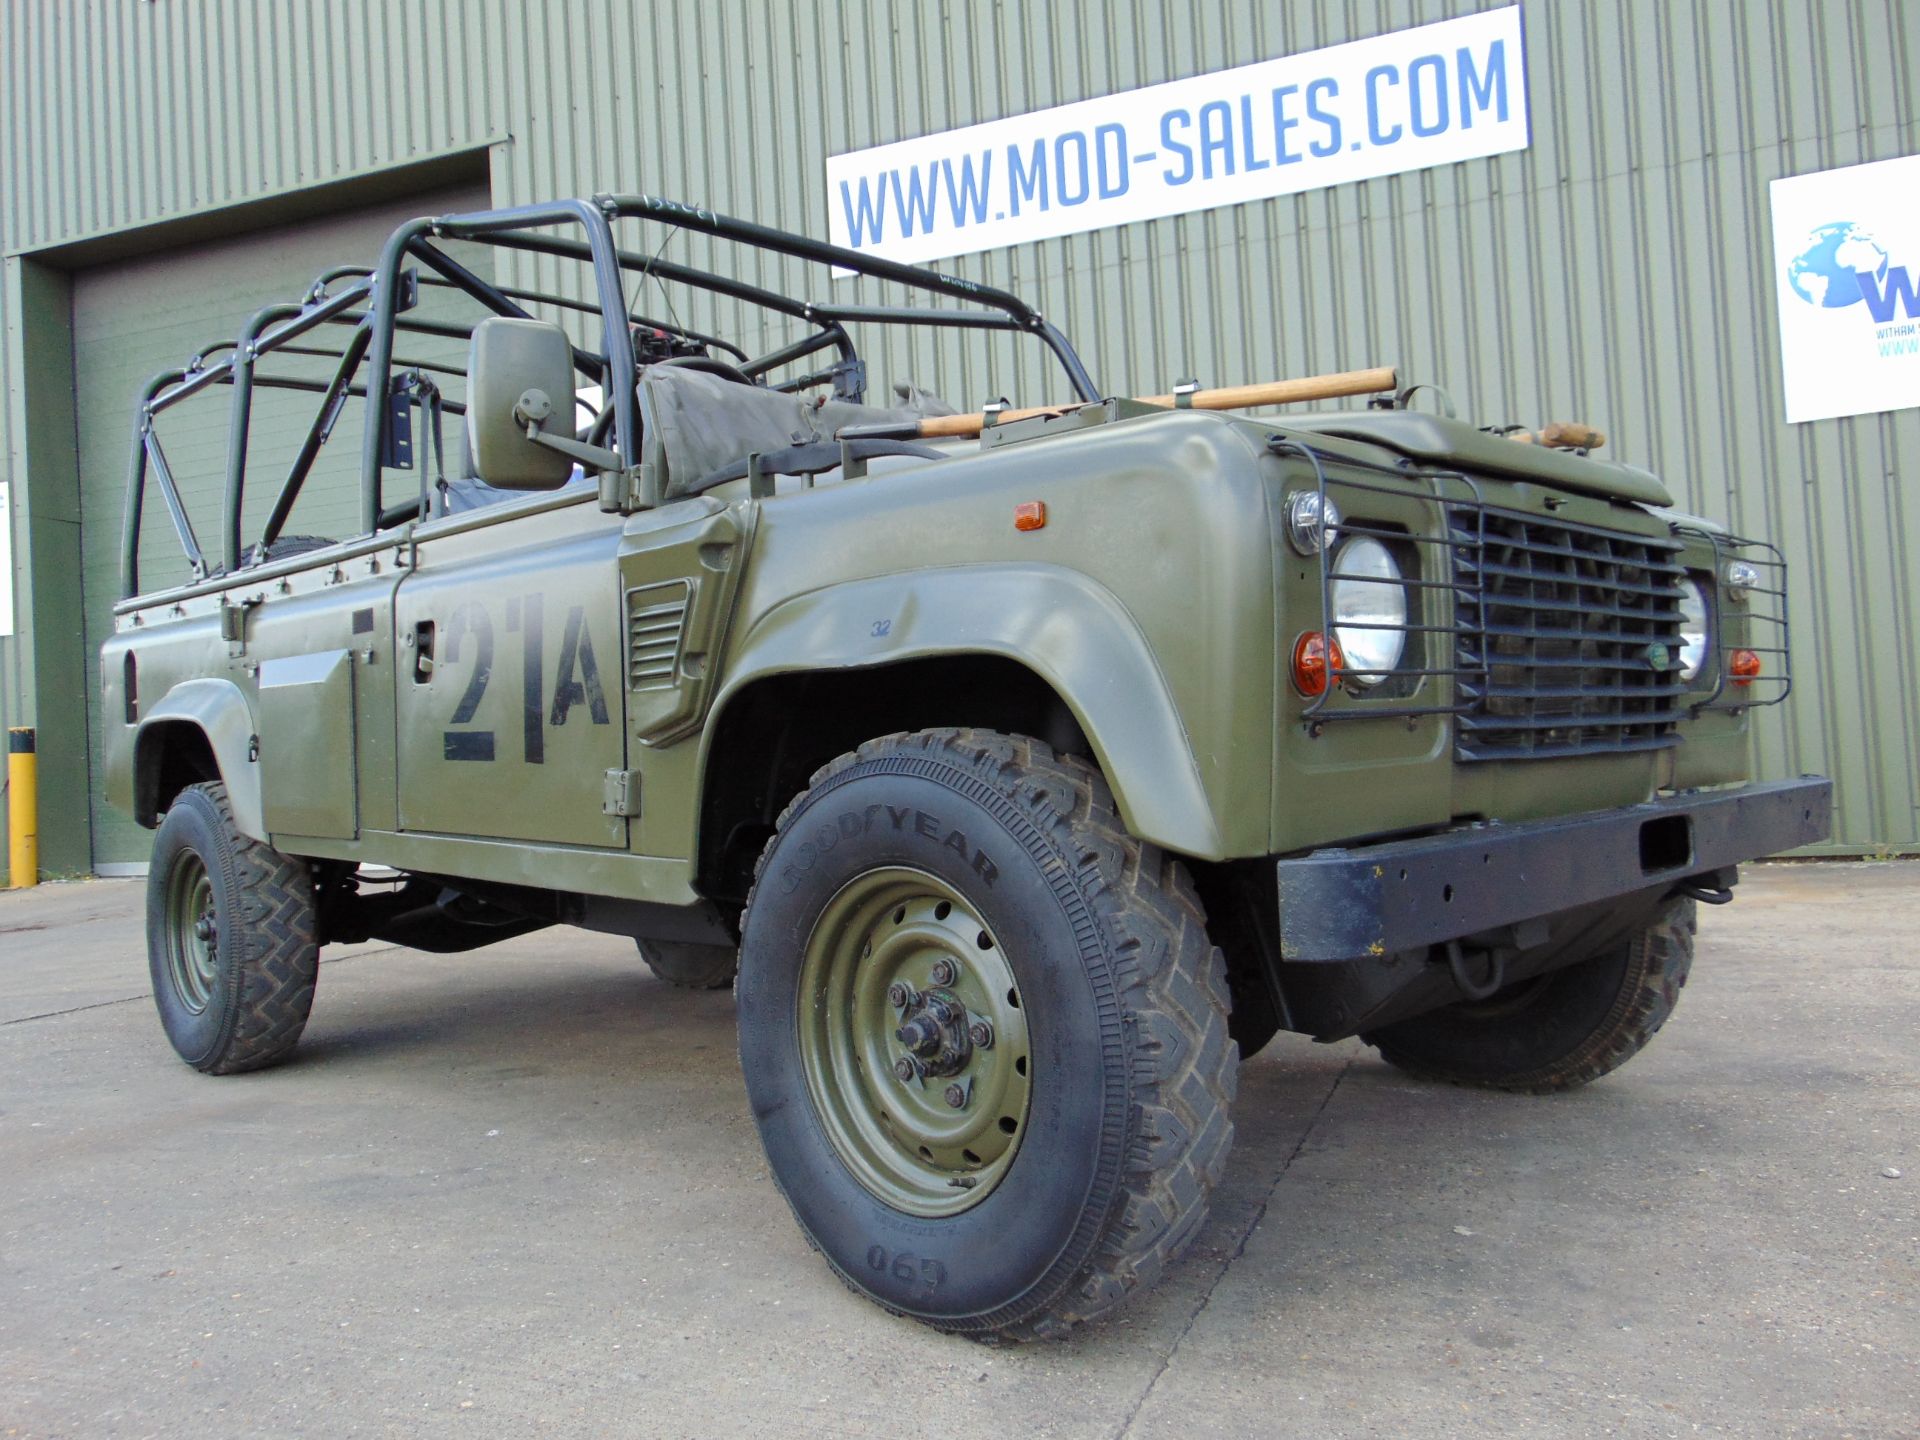 Land Rover Defender Wolf 110 Scout vehicle 300 Tdi - Image 2 of 37